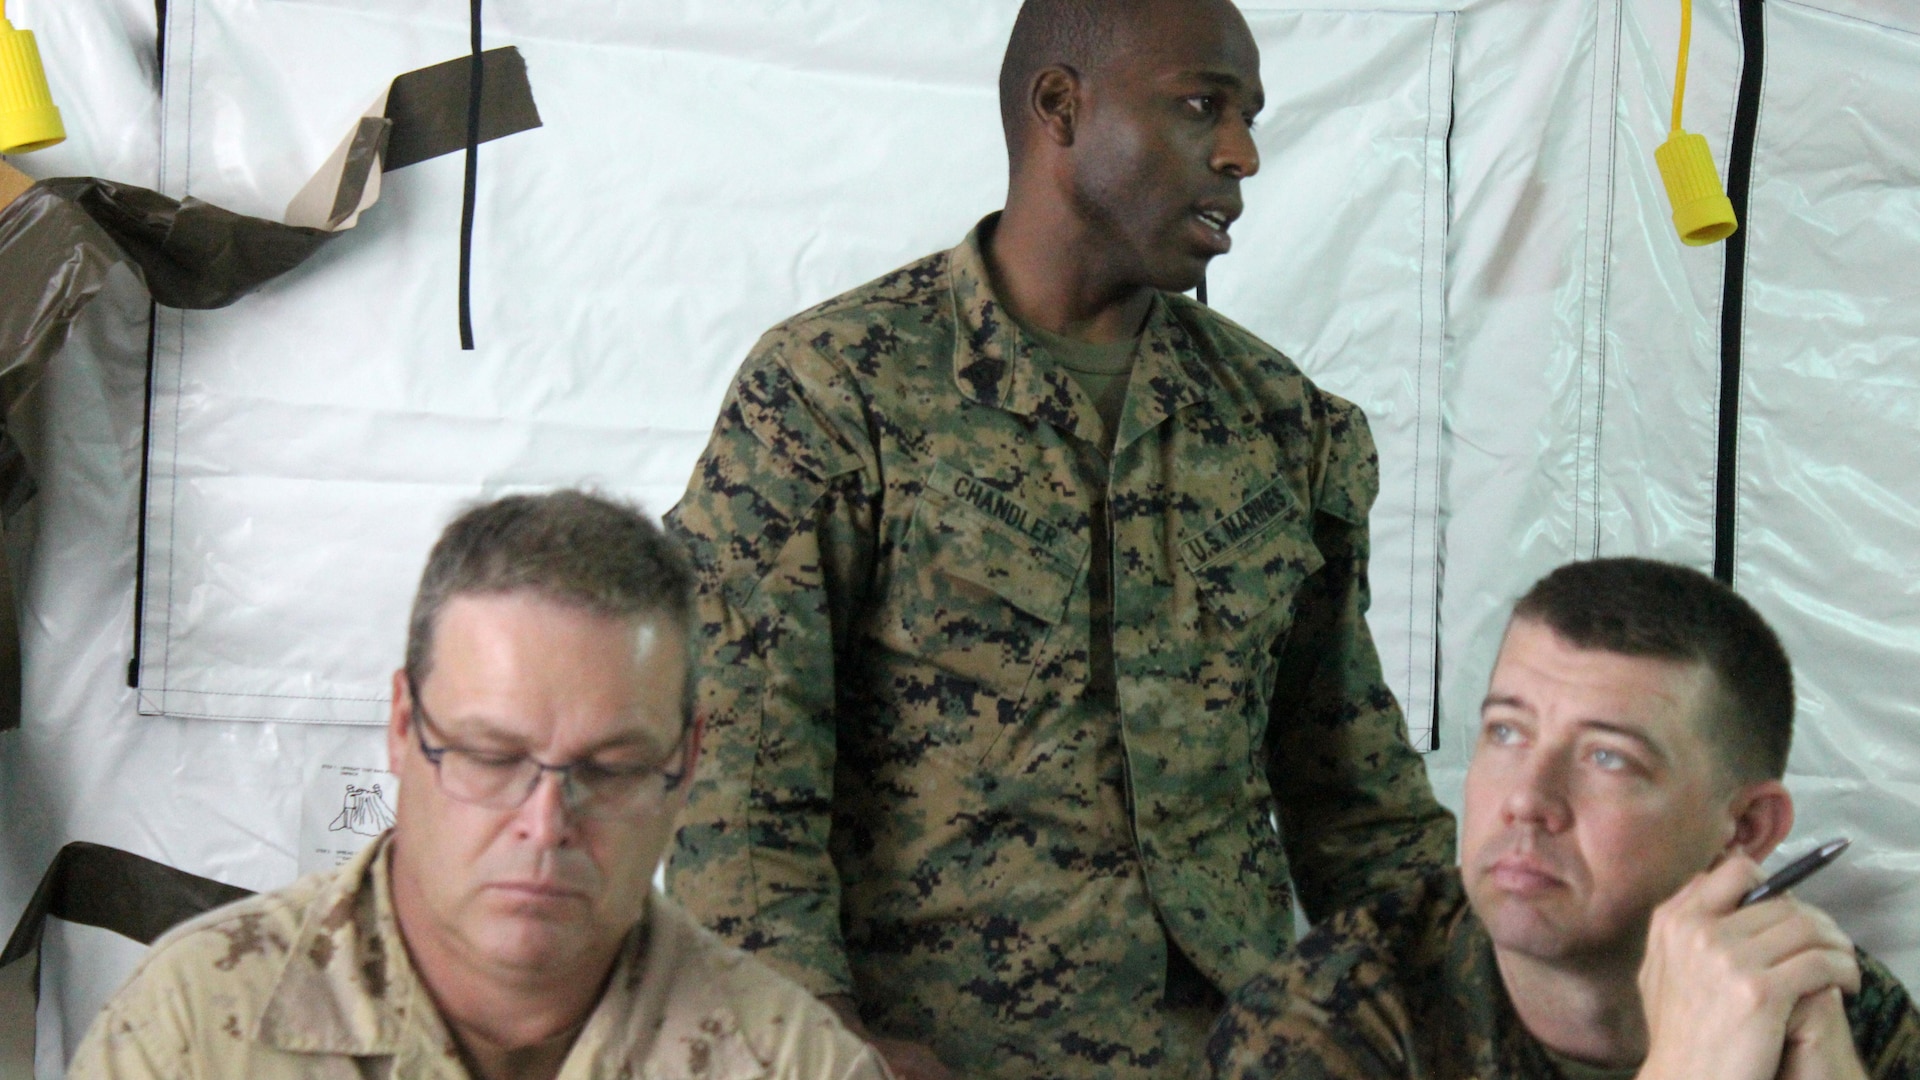 Gunnery Sgt. Sasha Chandler, intelligence analyst, briefs military officers participating in the command and control training of Phase II during exercise Tradewinds 2016, at Up Park Camp, Jamaica, June 24, 2016. Tradewinds includes both maritime and land phases, which will further enhance opportunities for participating countries to improve their security and disaster assistance capabilities.